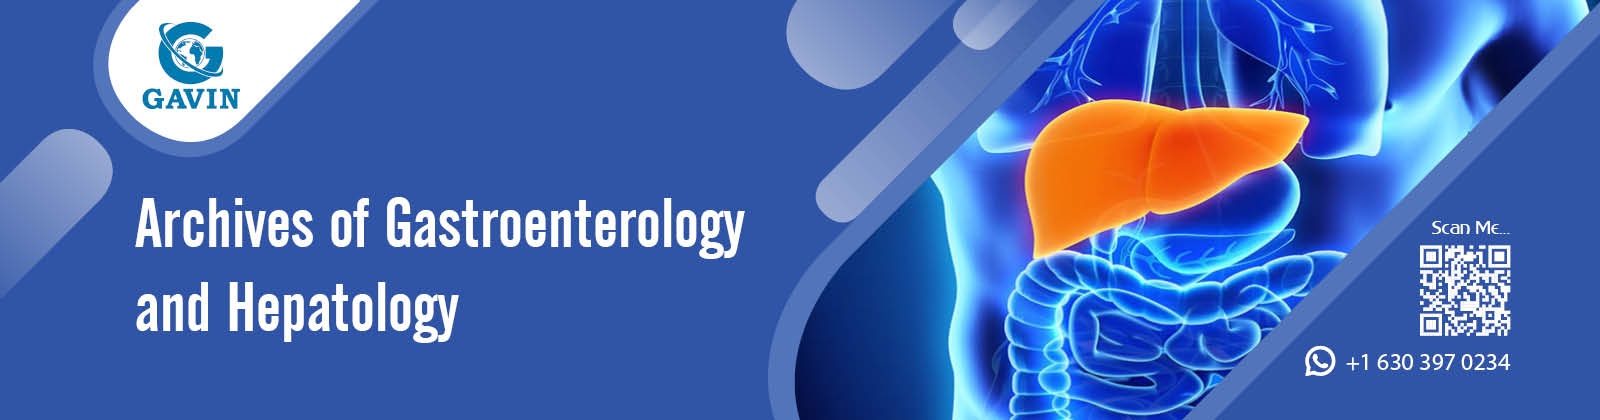 Archives of Gastroenterology and Hepatology